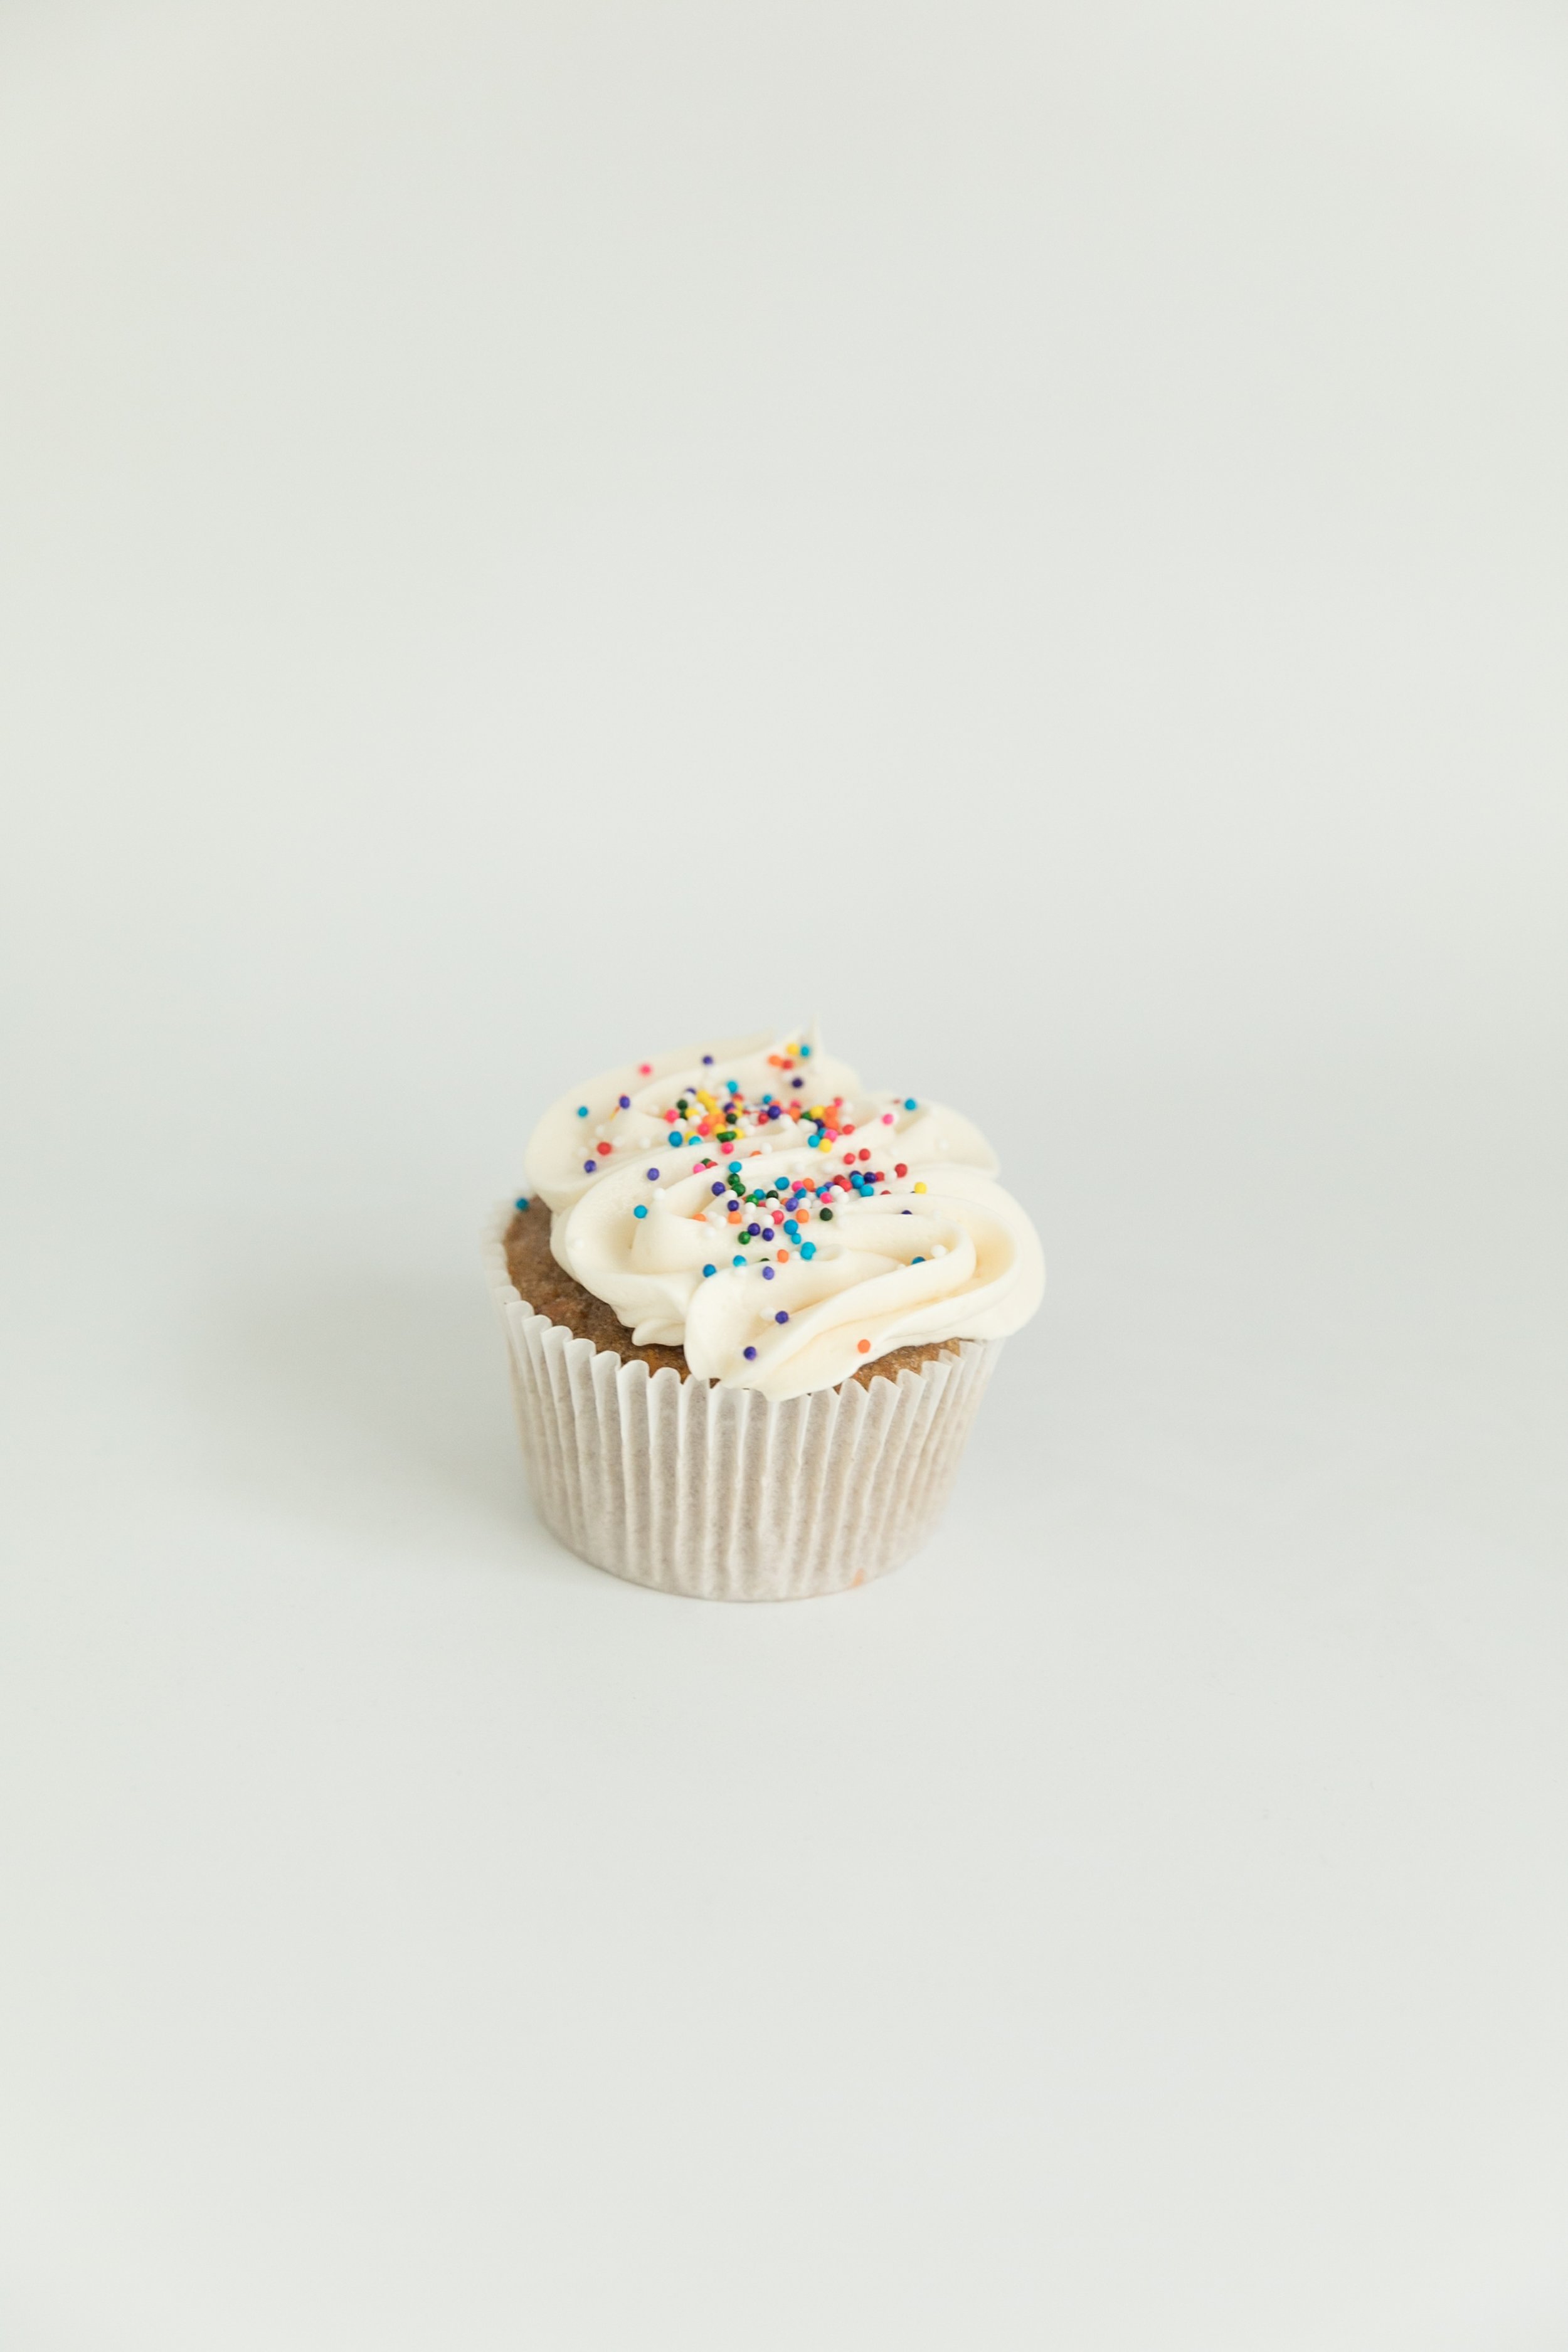  carrot cupcake with cream cheese frosting  